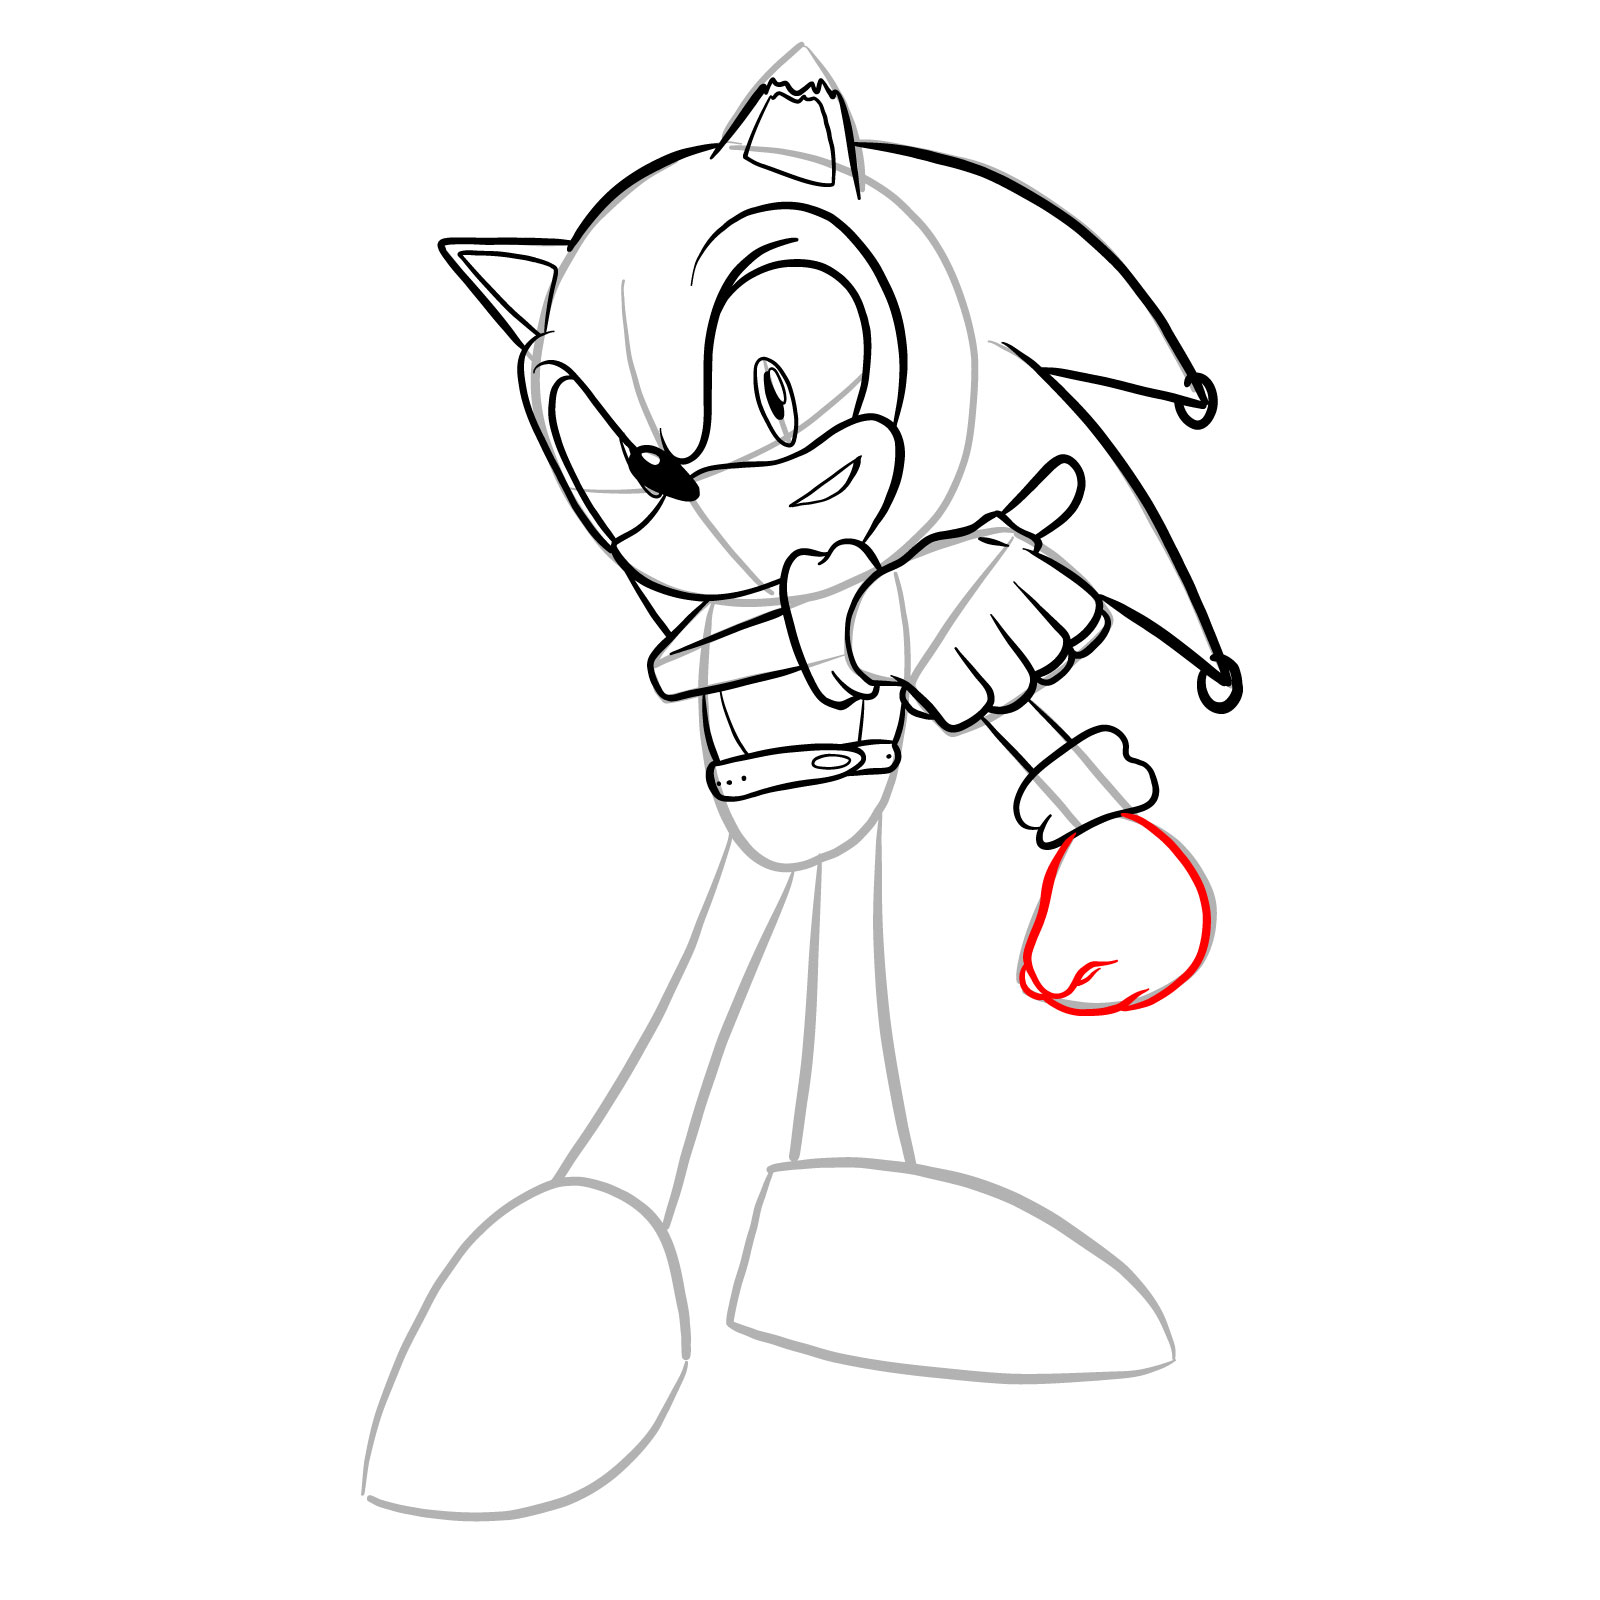 How to draw Coldsteel the Hedgehog - step 23